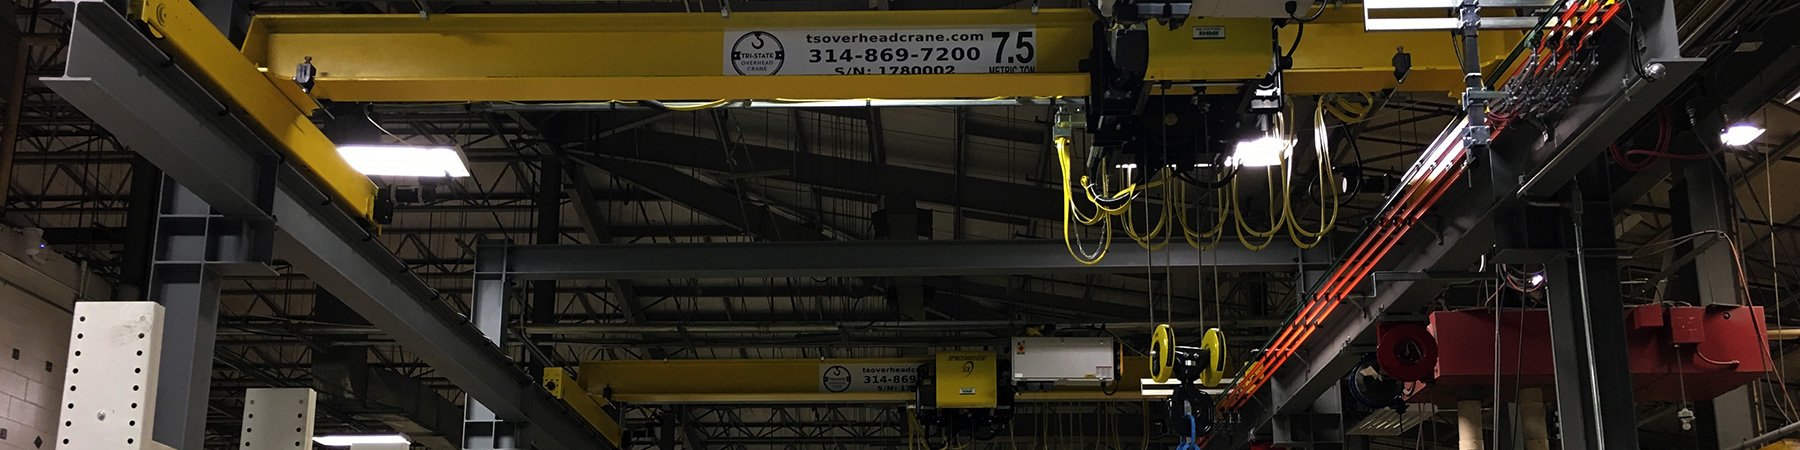 7.5 ton Top Running Overhead Bridge Cranes that Crane Operators could use after taking CMAA Certification Training Course.